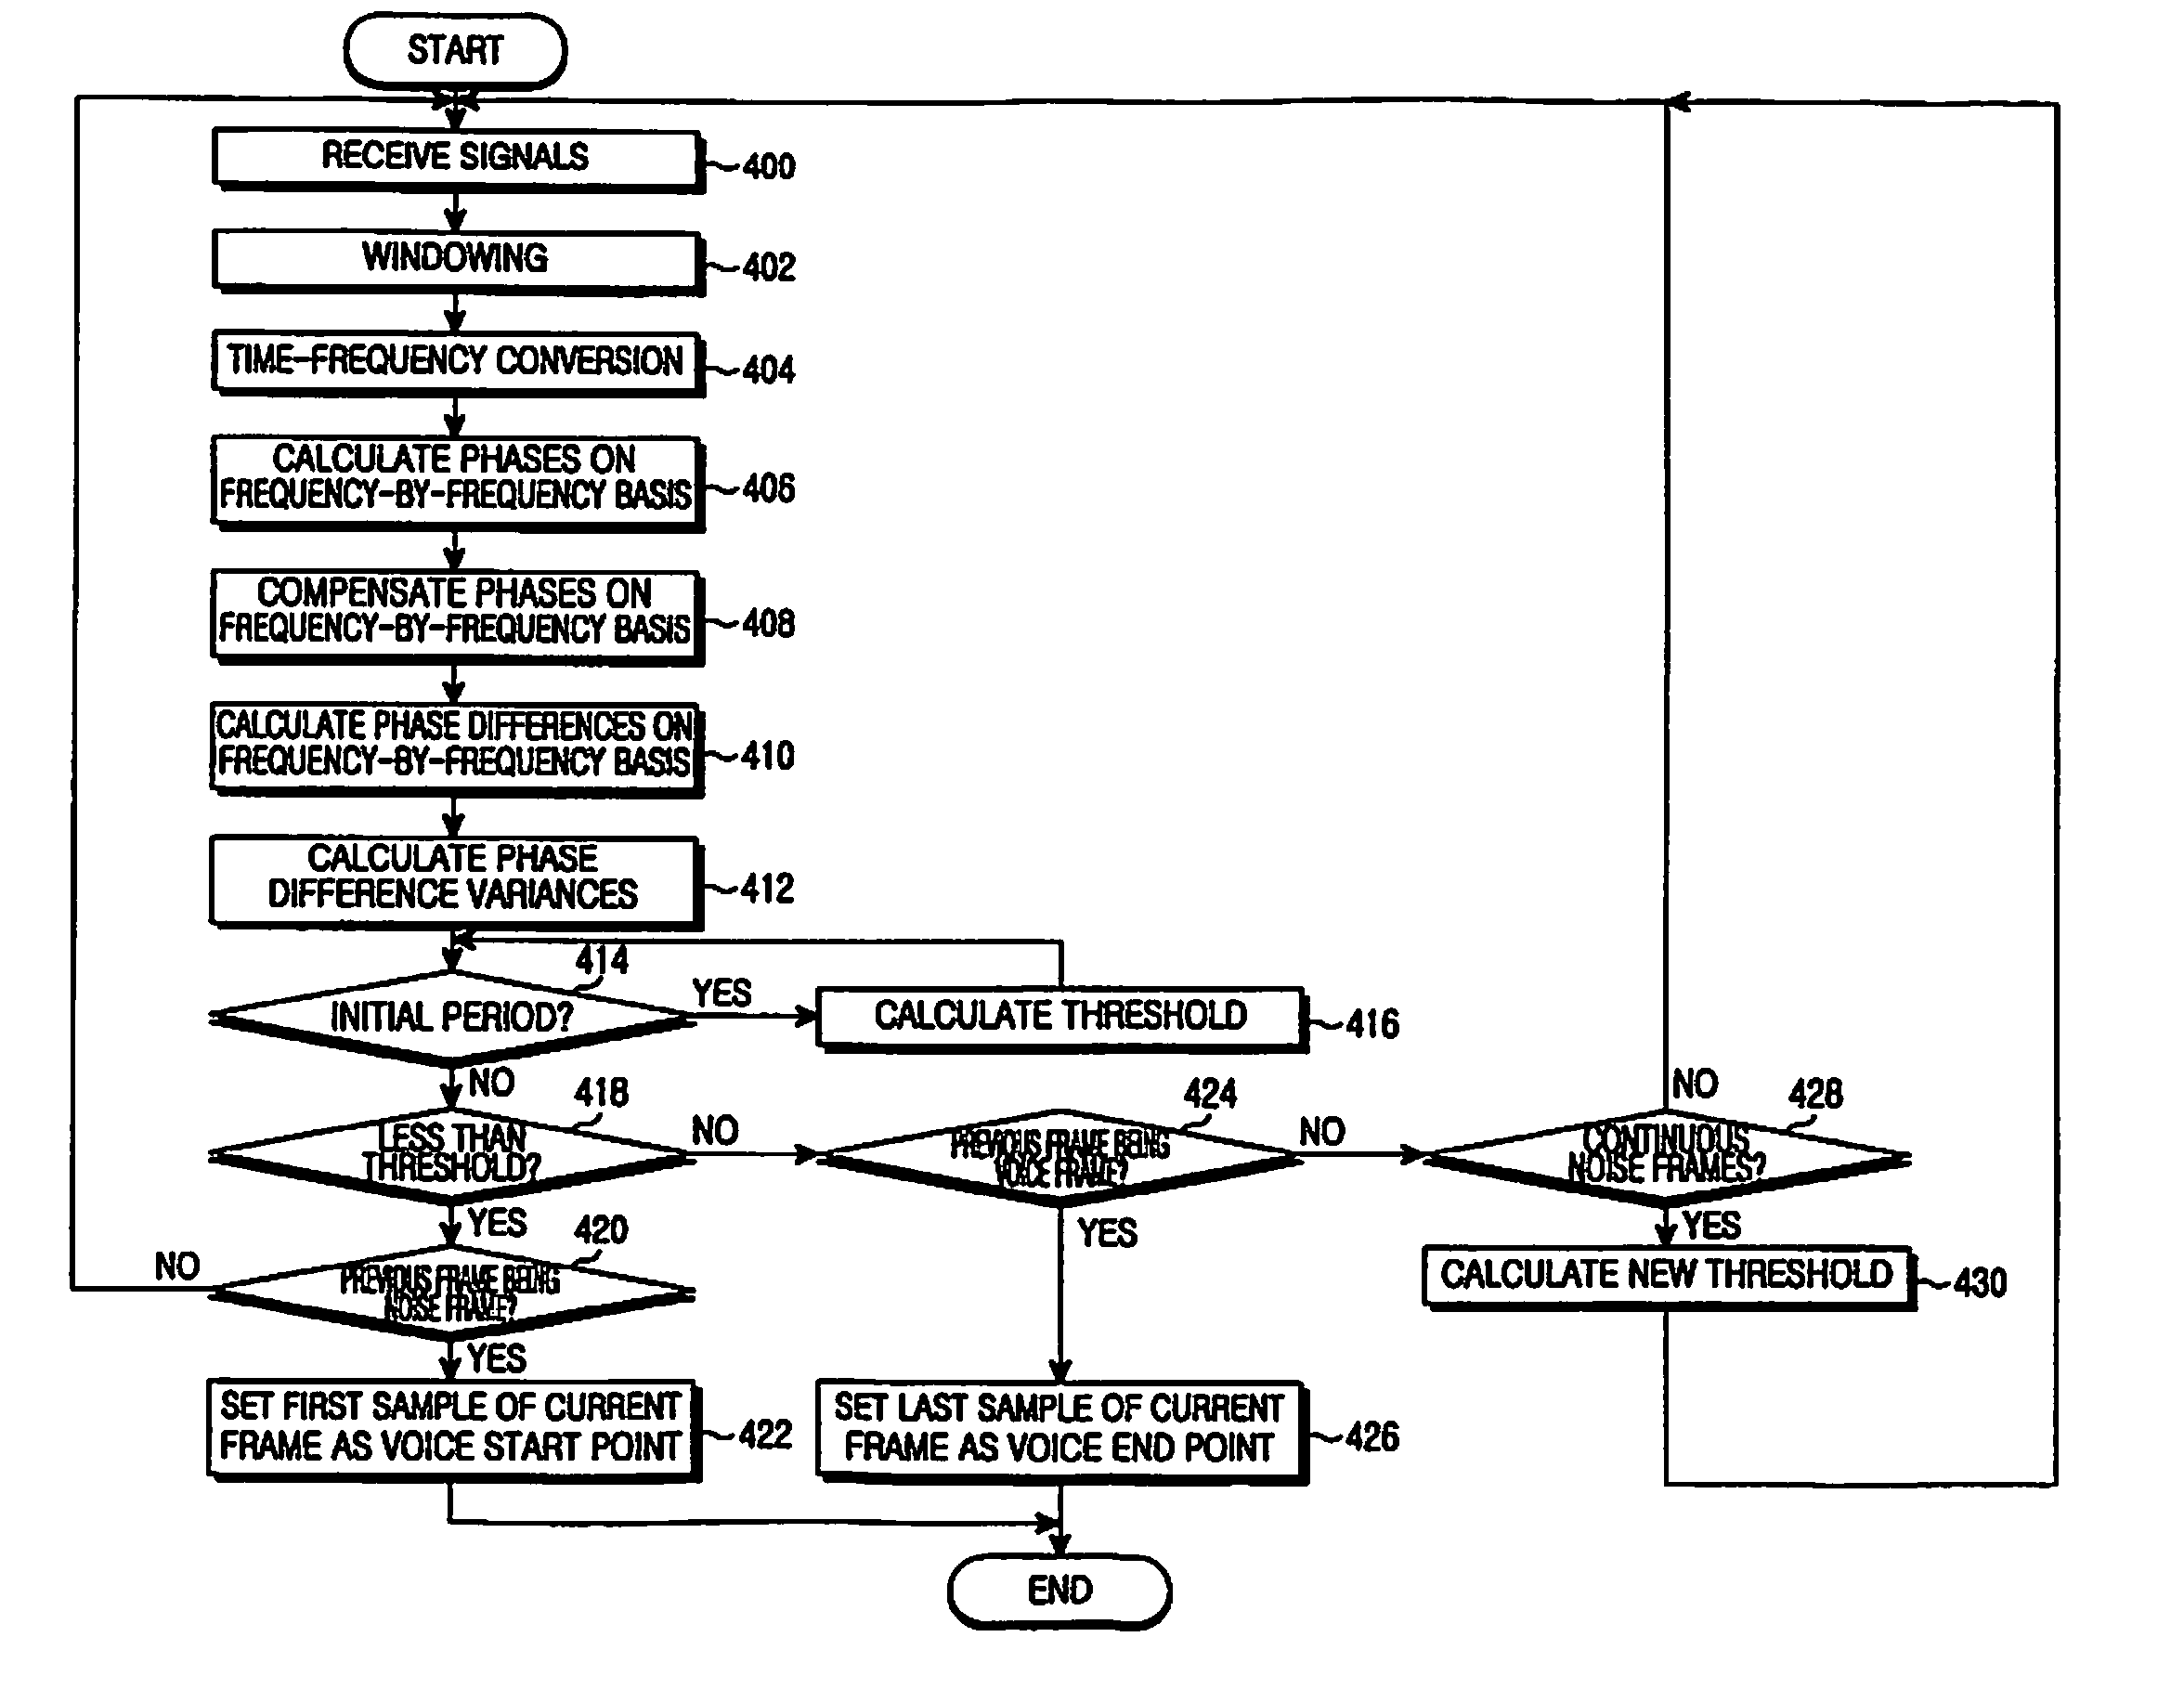 Apparatus and method for detecting voice end point